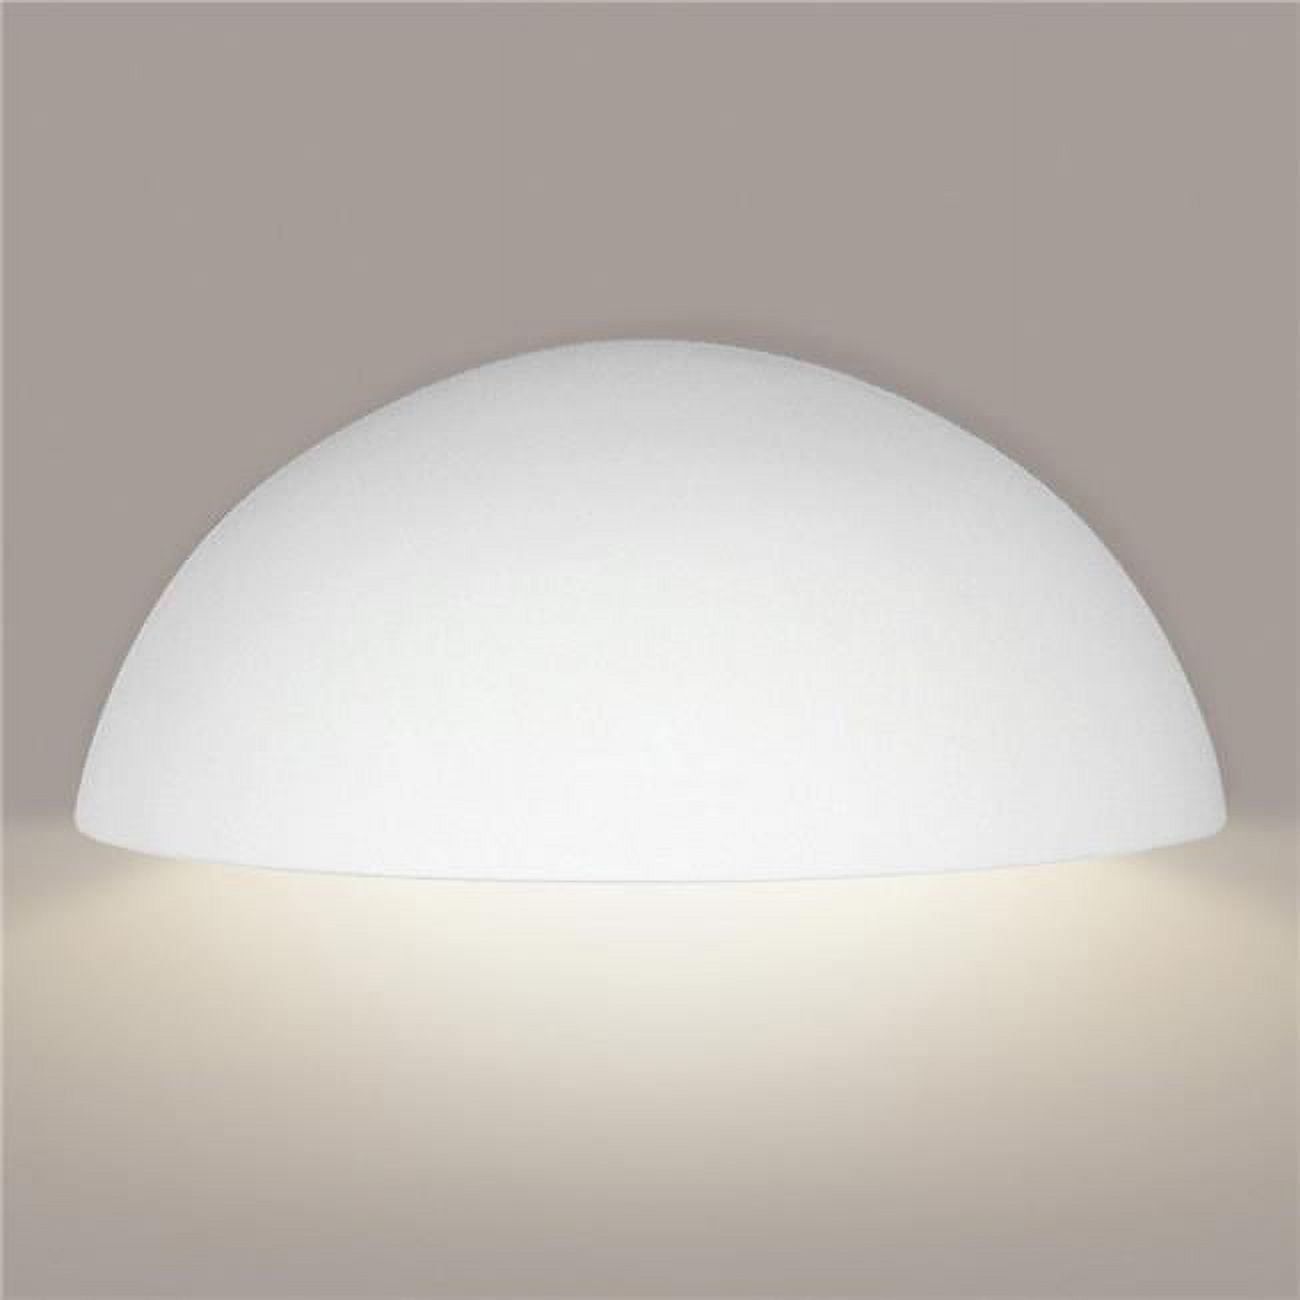 A19 Lighting 309D-2LEDE26 Great Thera Downlight Wall Sconce, Bisque